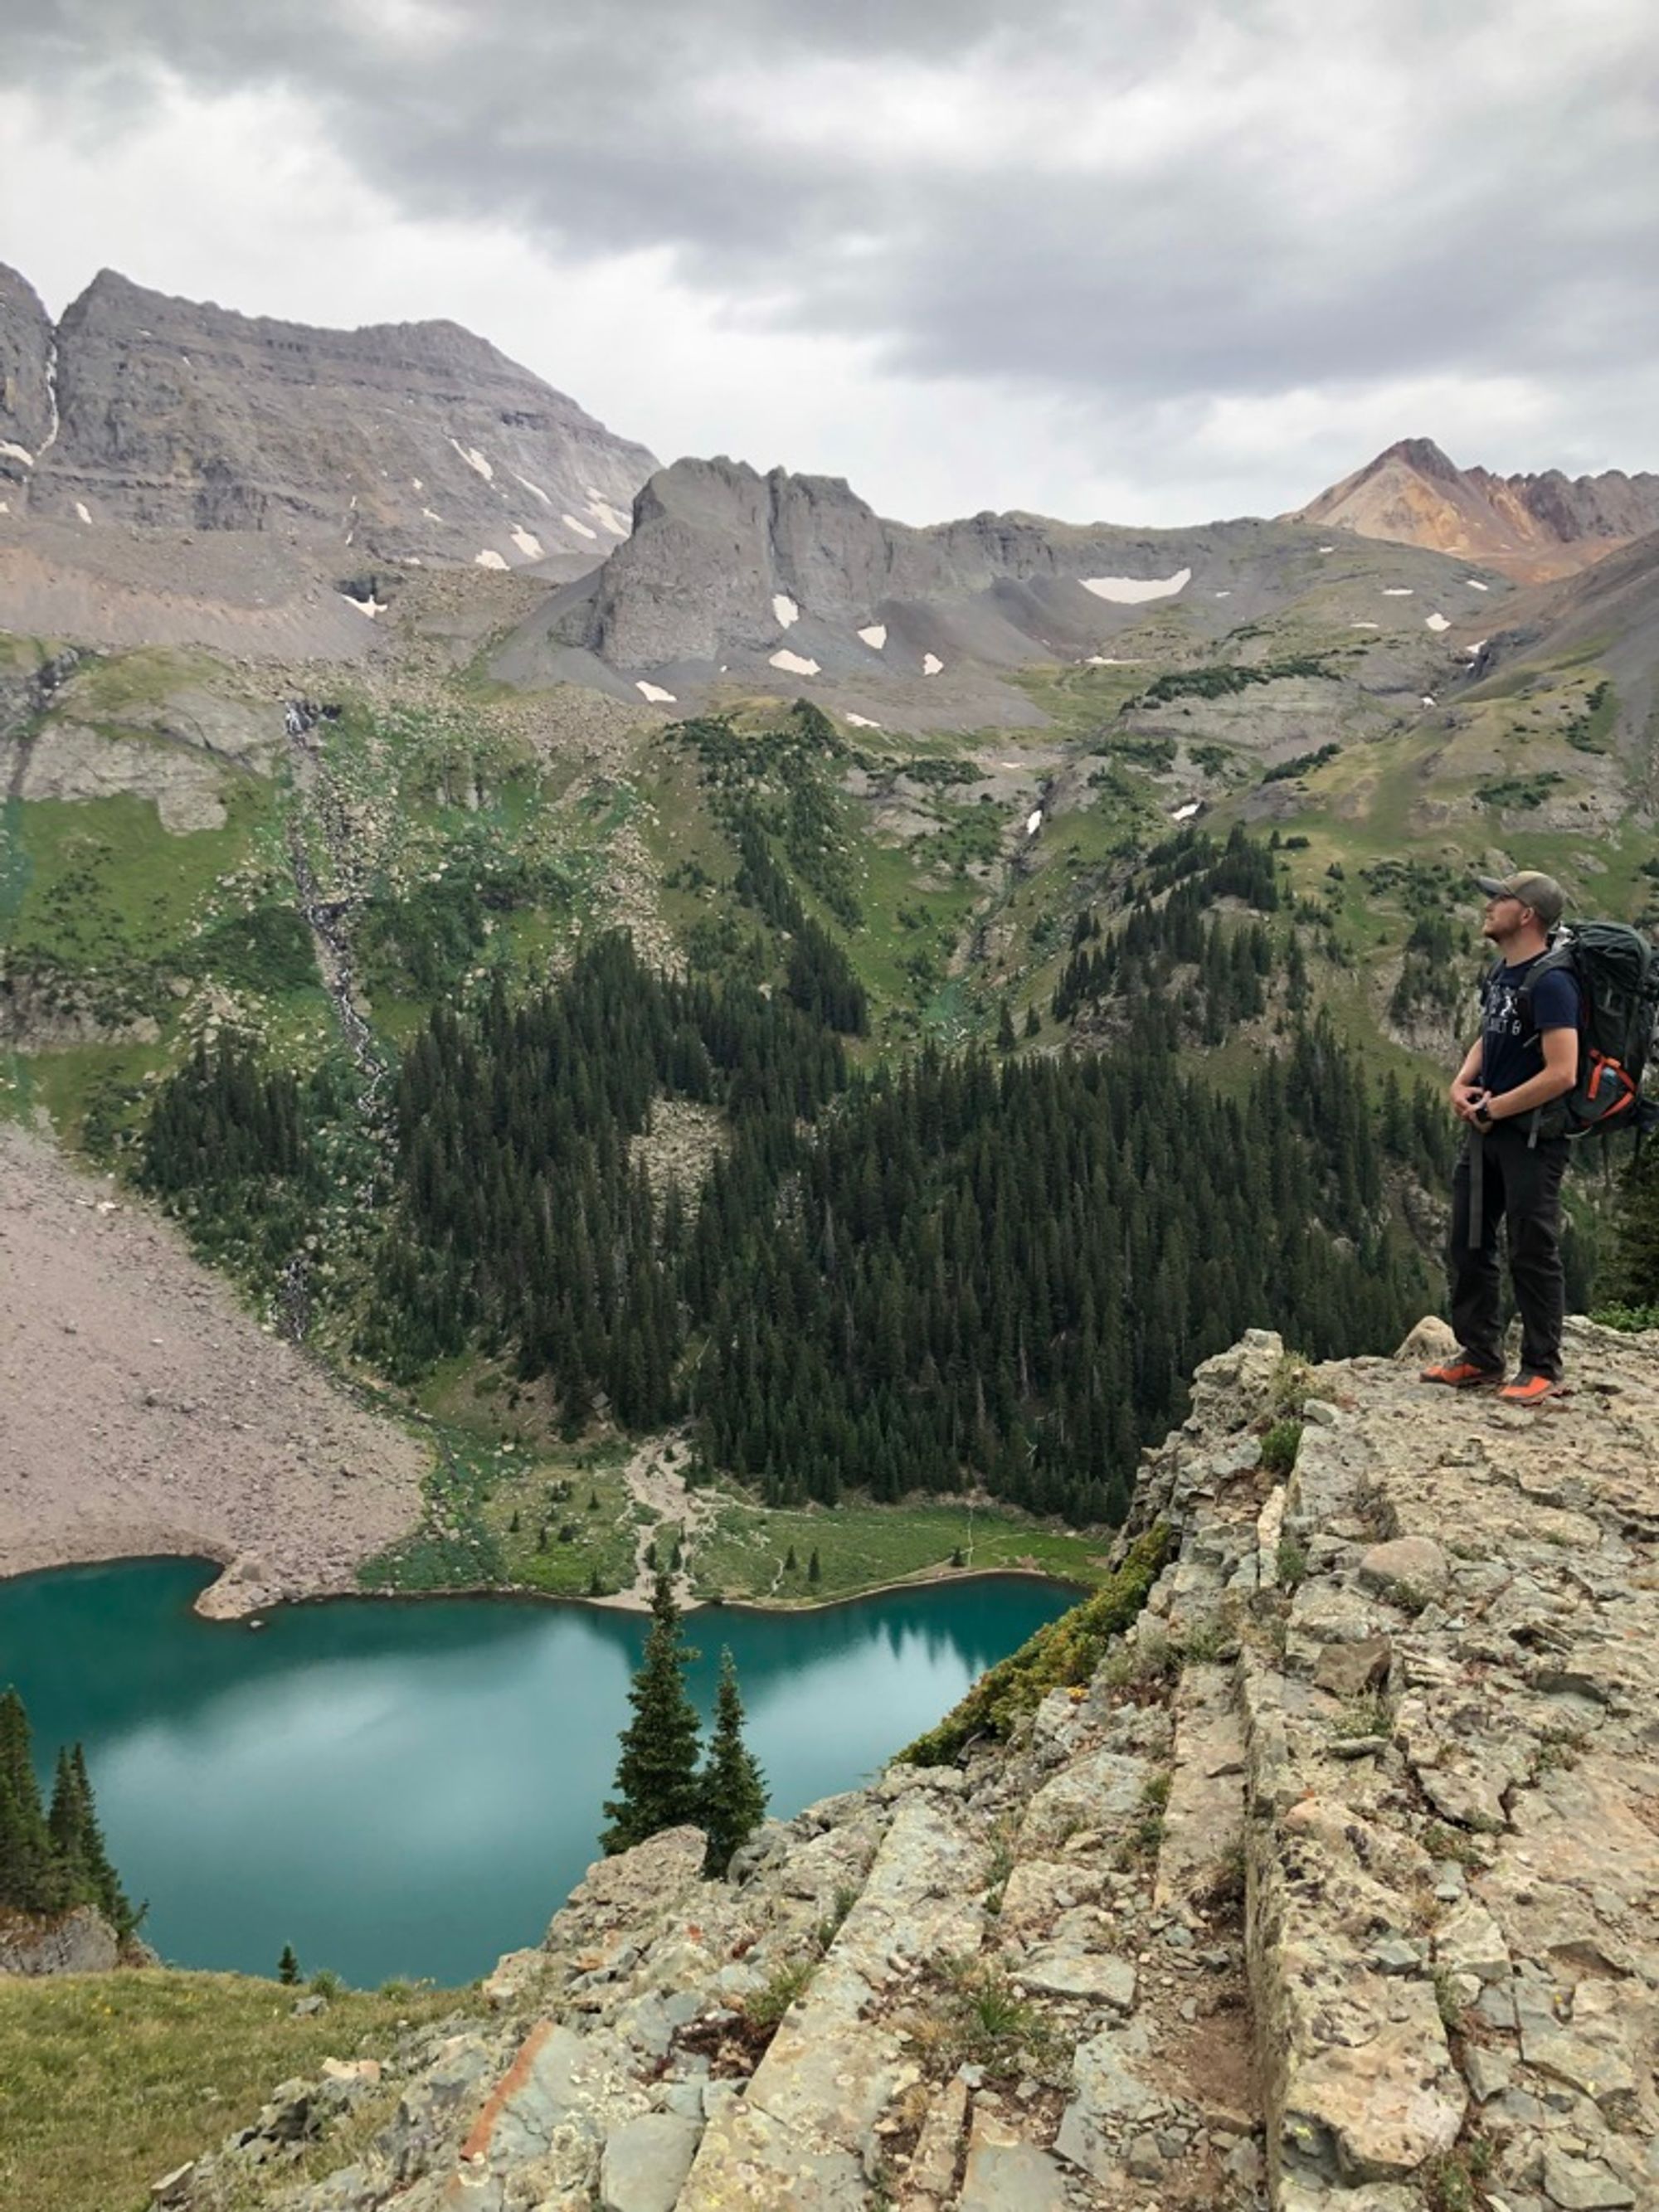 Me, on a cliff, overlooking a Blue Lake and the towering ridgeline above